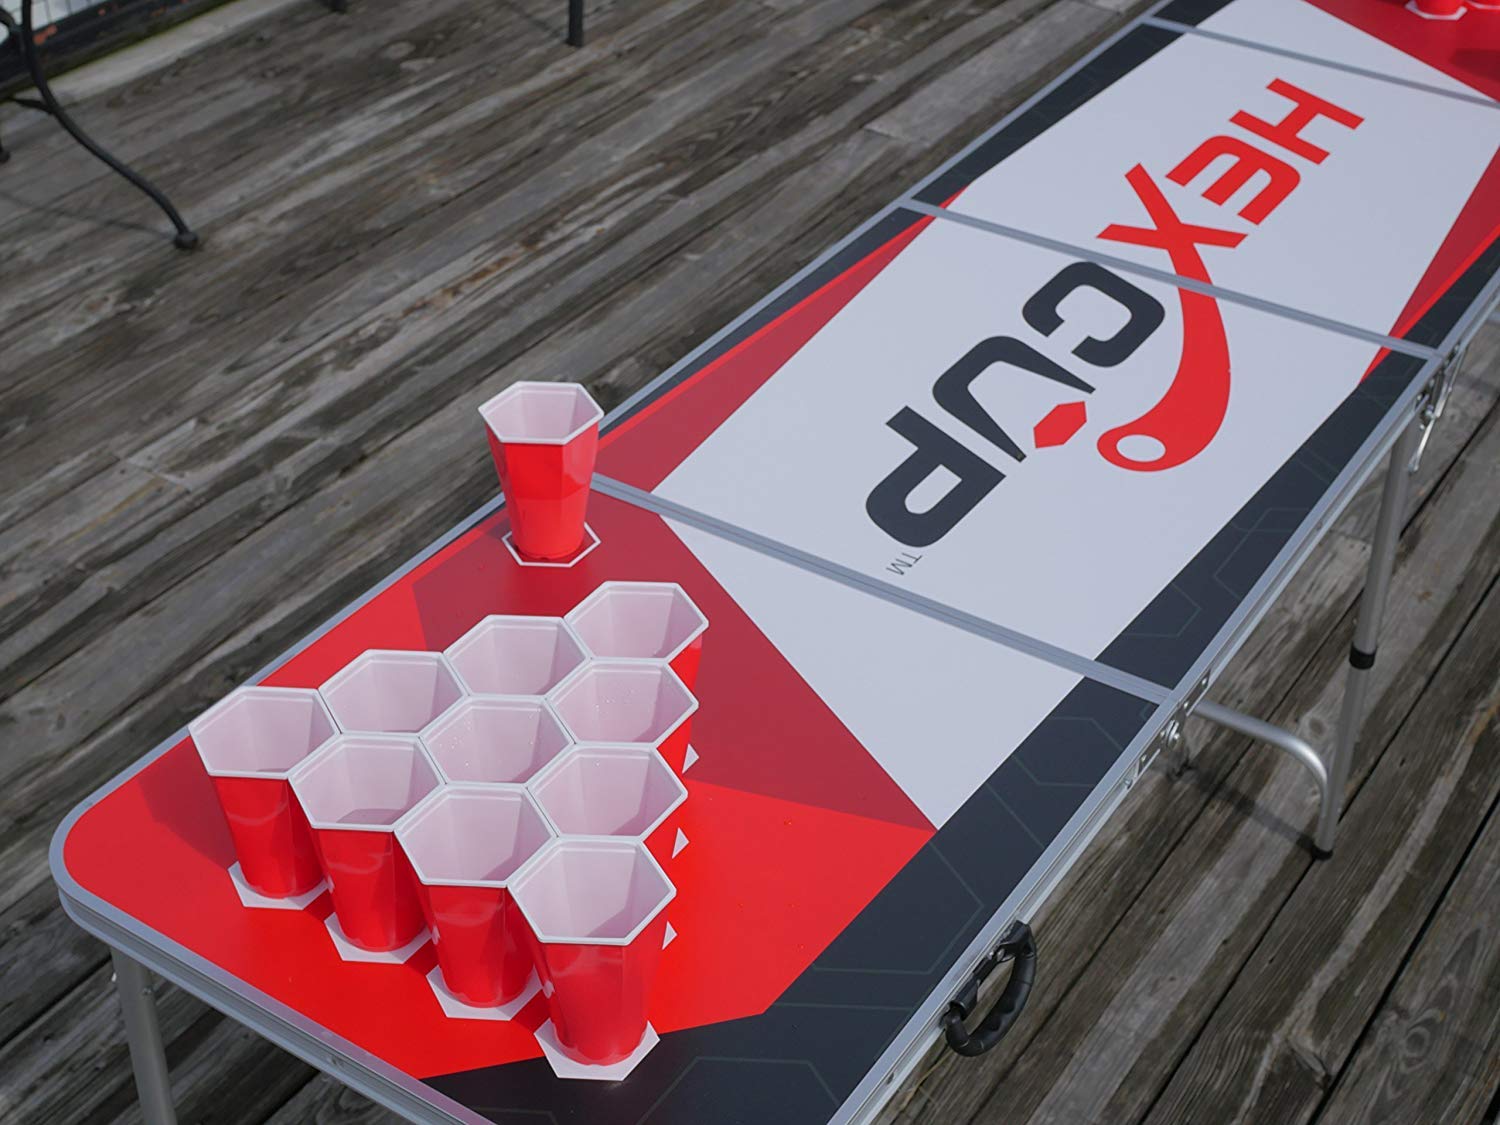 HEXCUP - Reusable Party Pong Cup Set by PartyPong - 22 Reusable Cups, 3 Balls, & Plastic Game Card